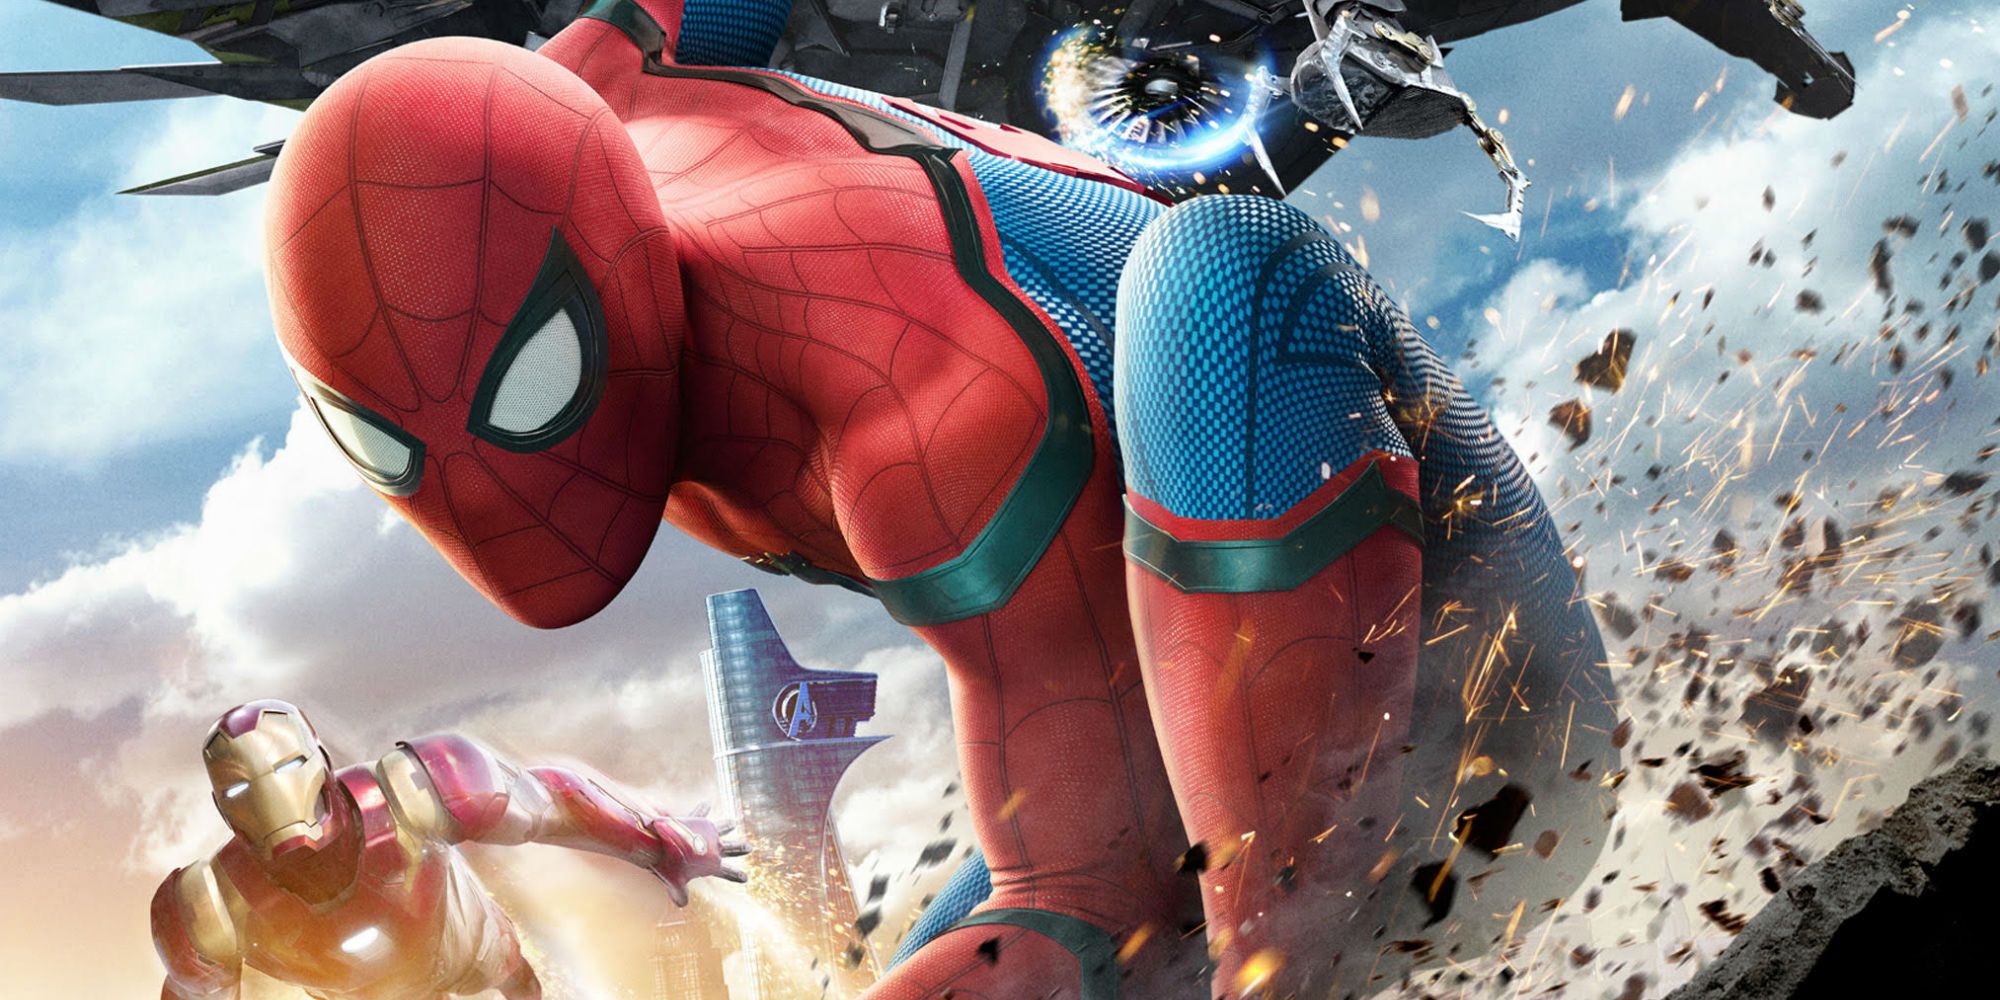 Spider-Man springs into action from the Spider-Man Homecoming Poster